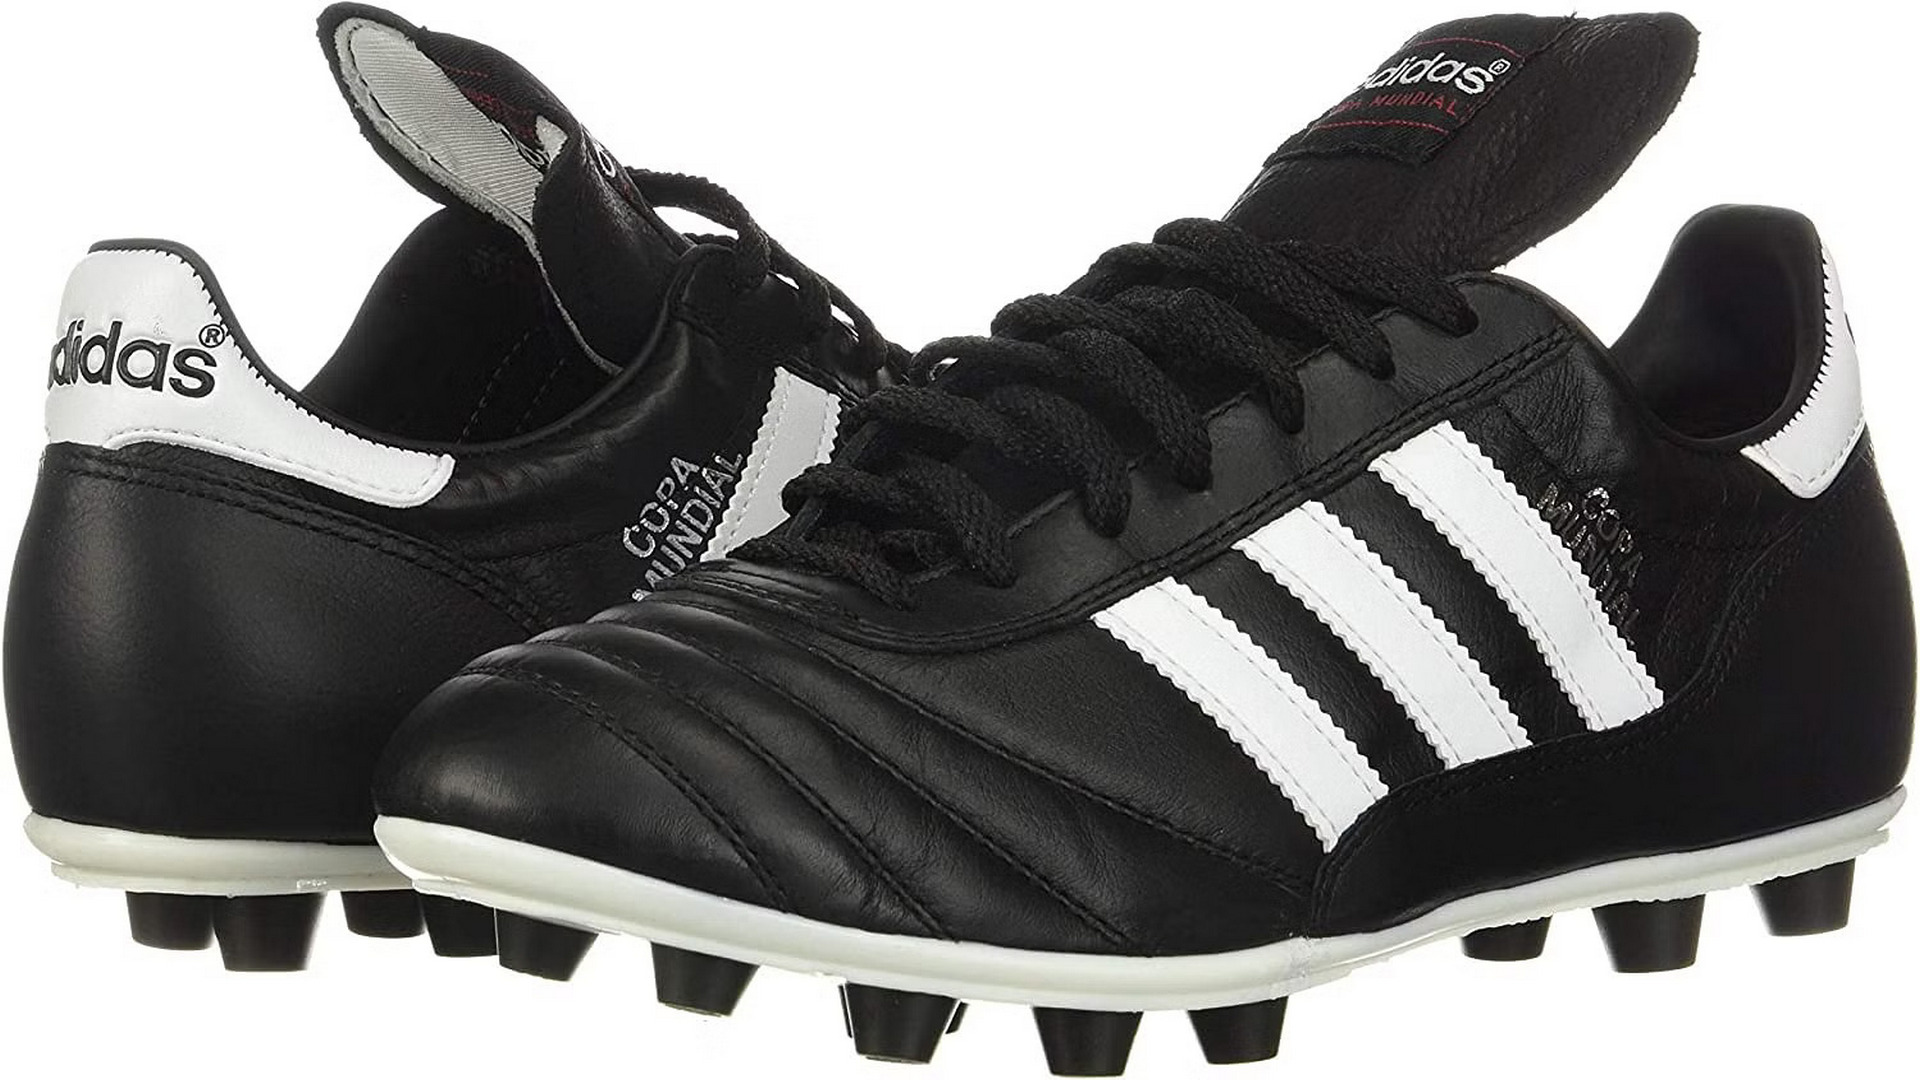 Adidas Copa Mundial Soccer Cleats